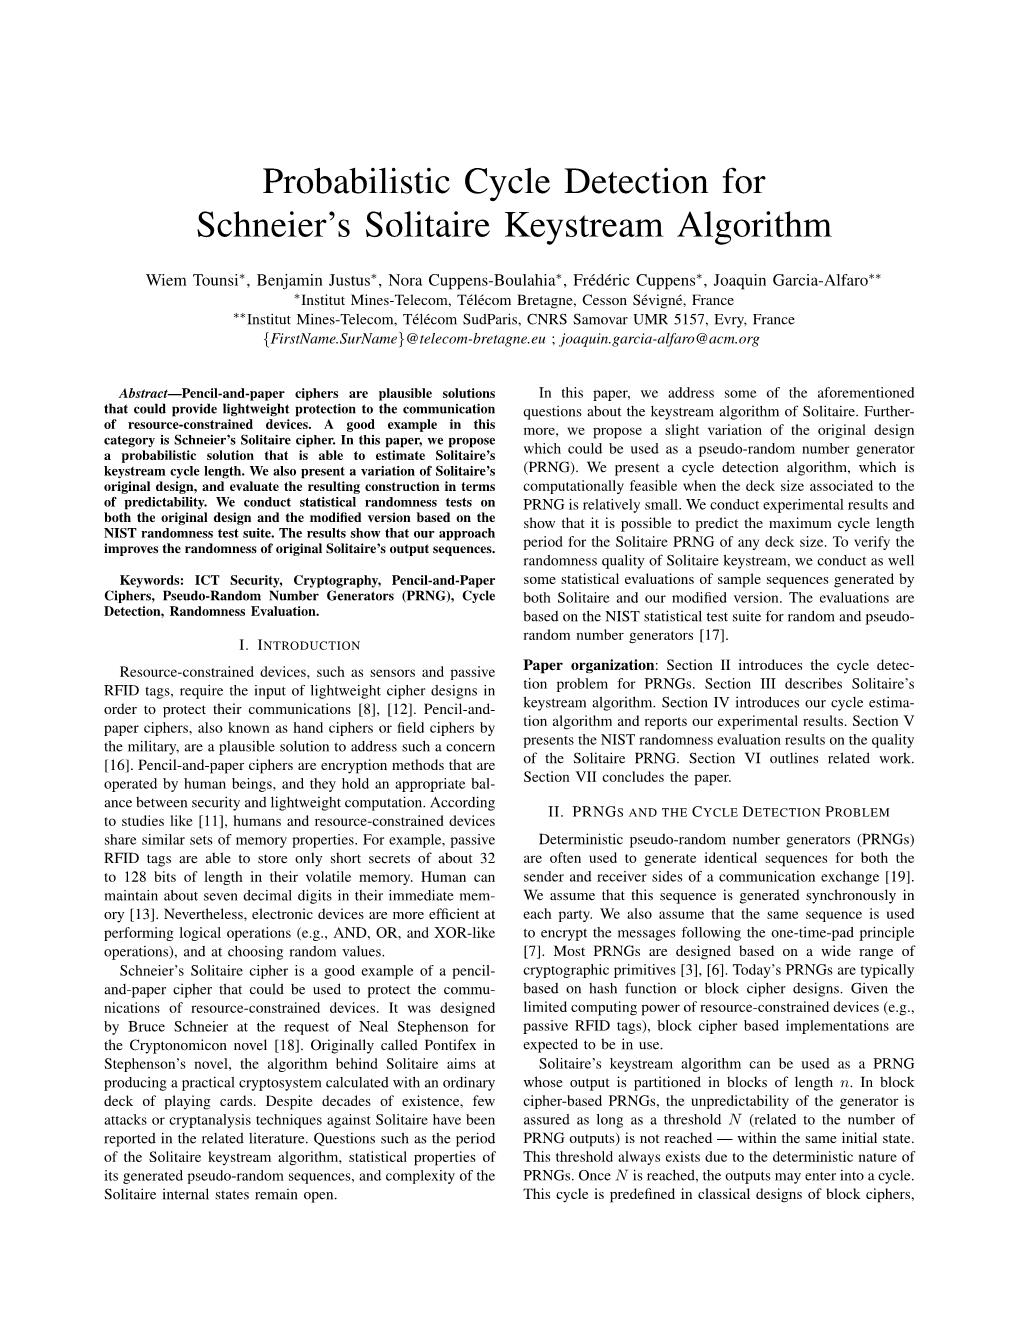 Probabilistic Cycle Detection for Schneie's Solitaire Keystream Algorithm